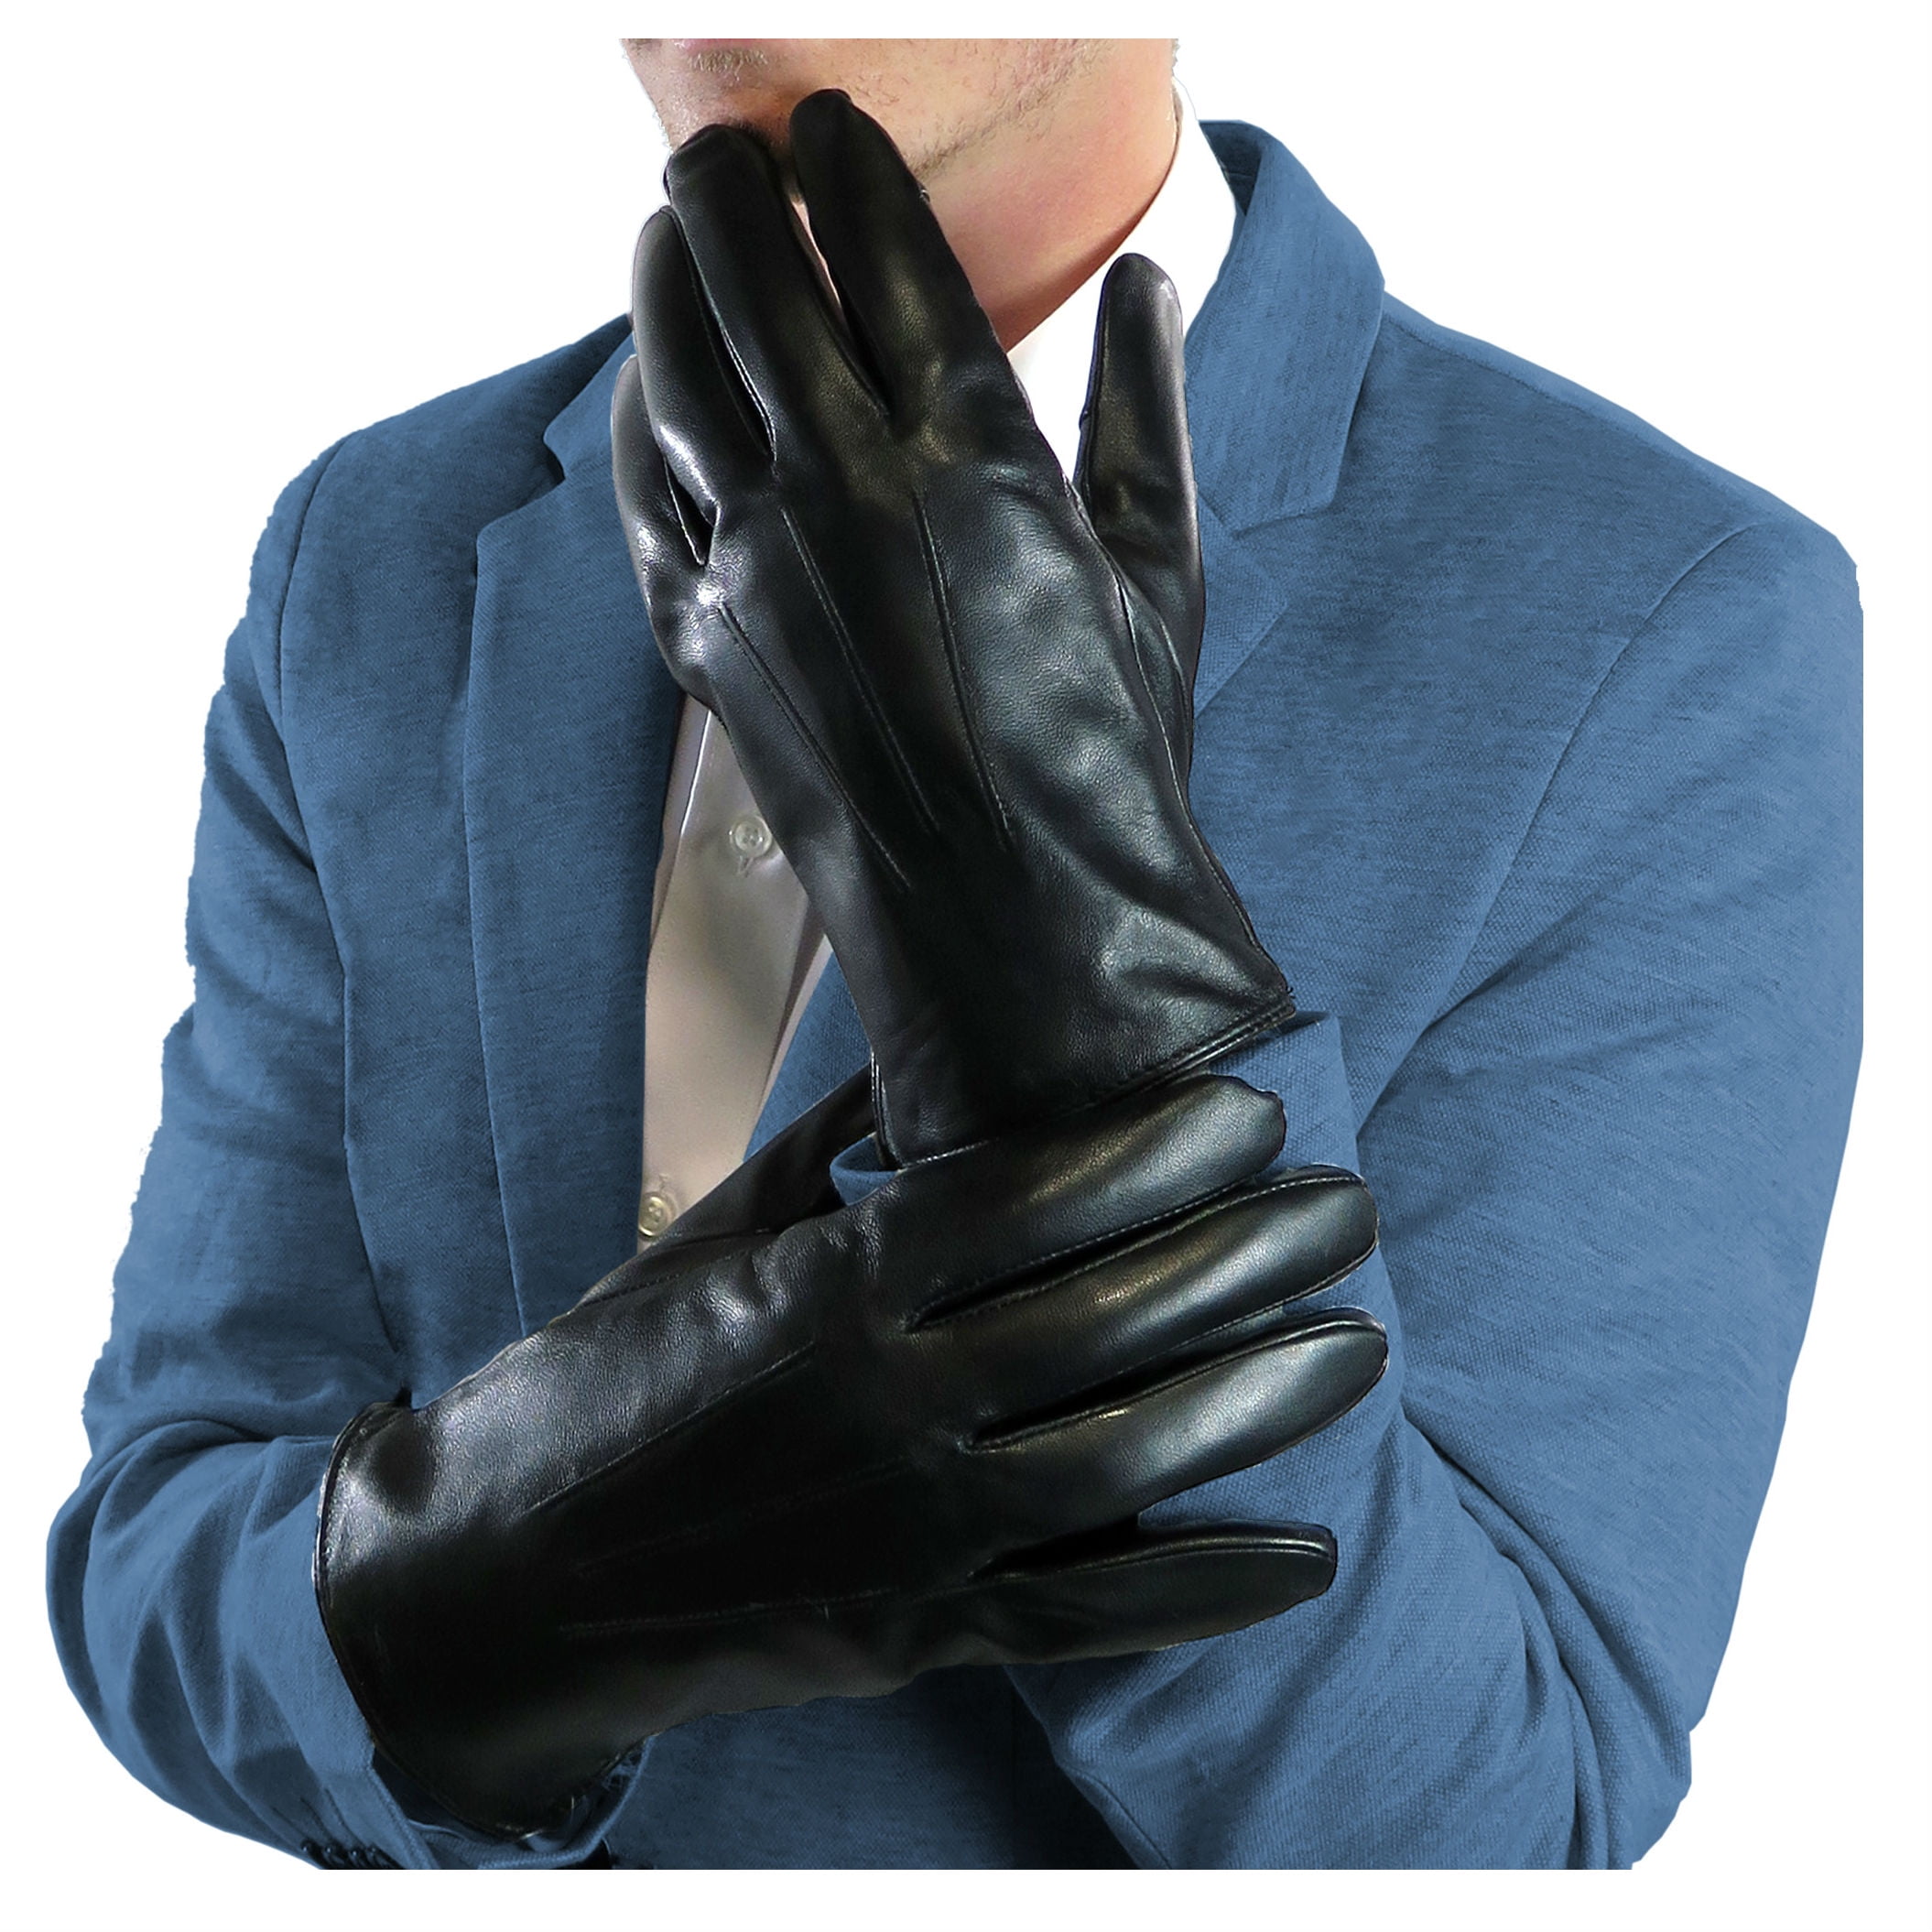 Men's Genuine Premium Leather Driving Dress Gloves Thermal lined Black 